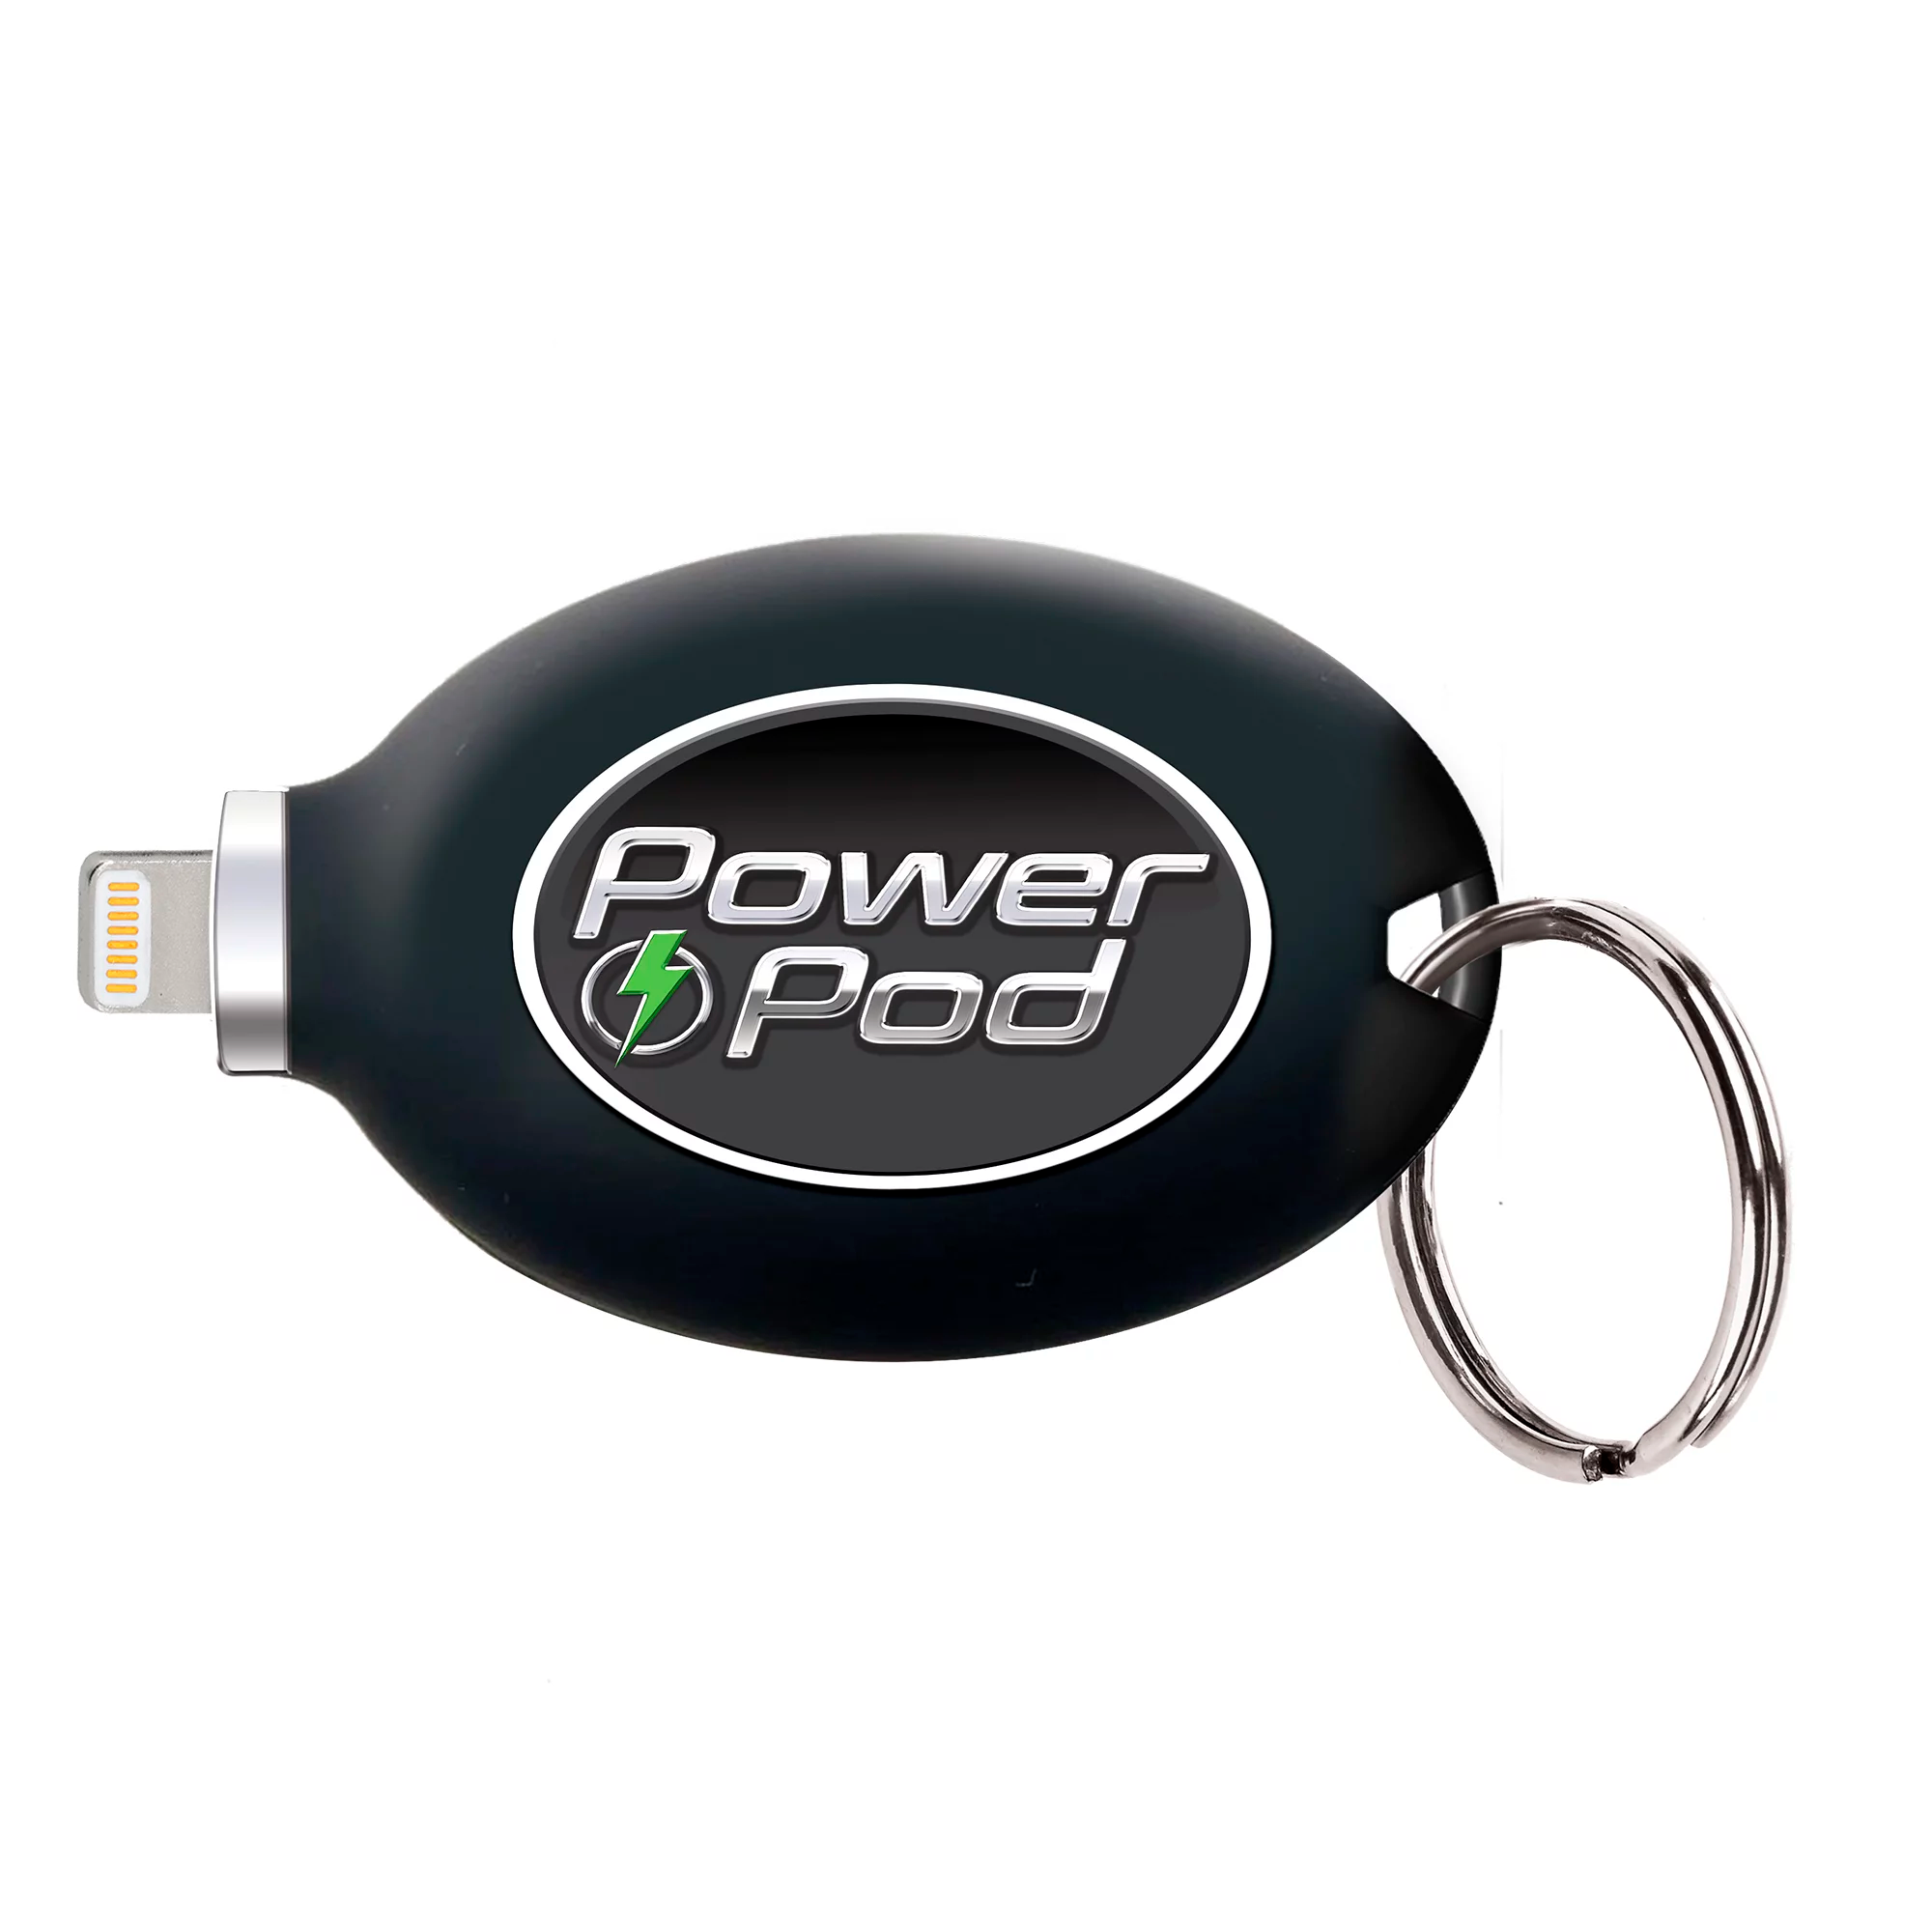 Power pod Charger 